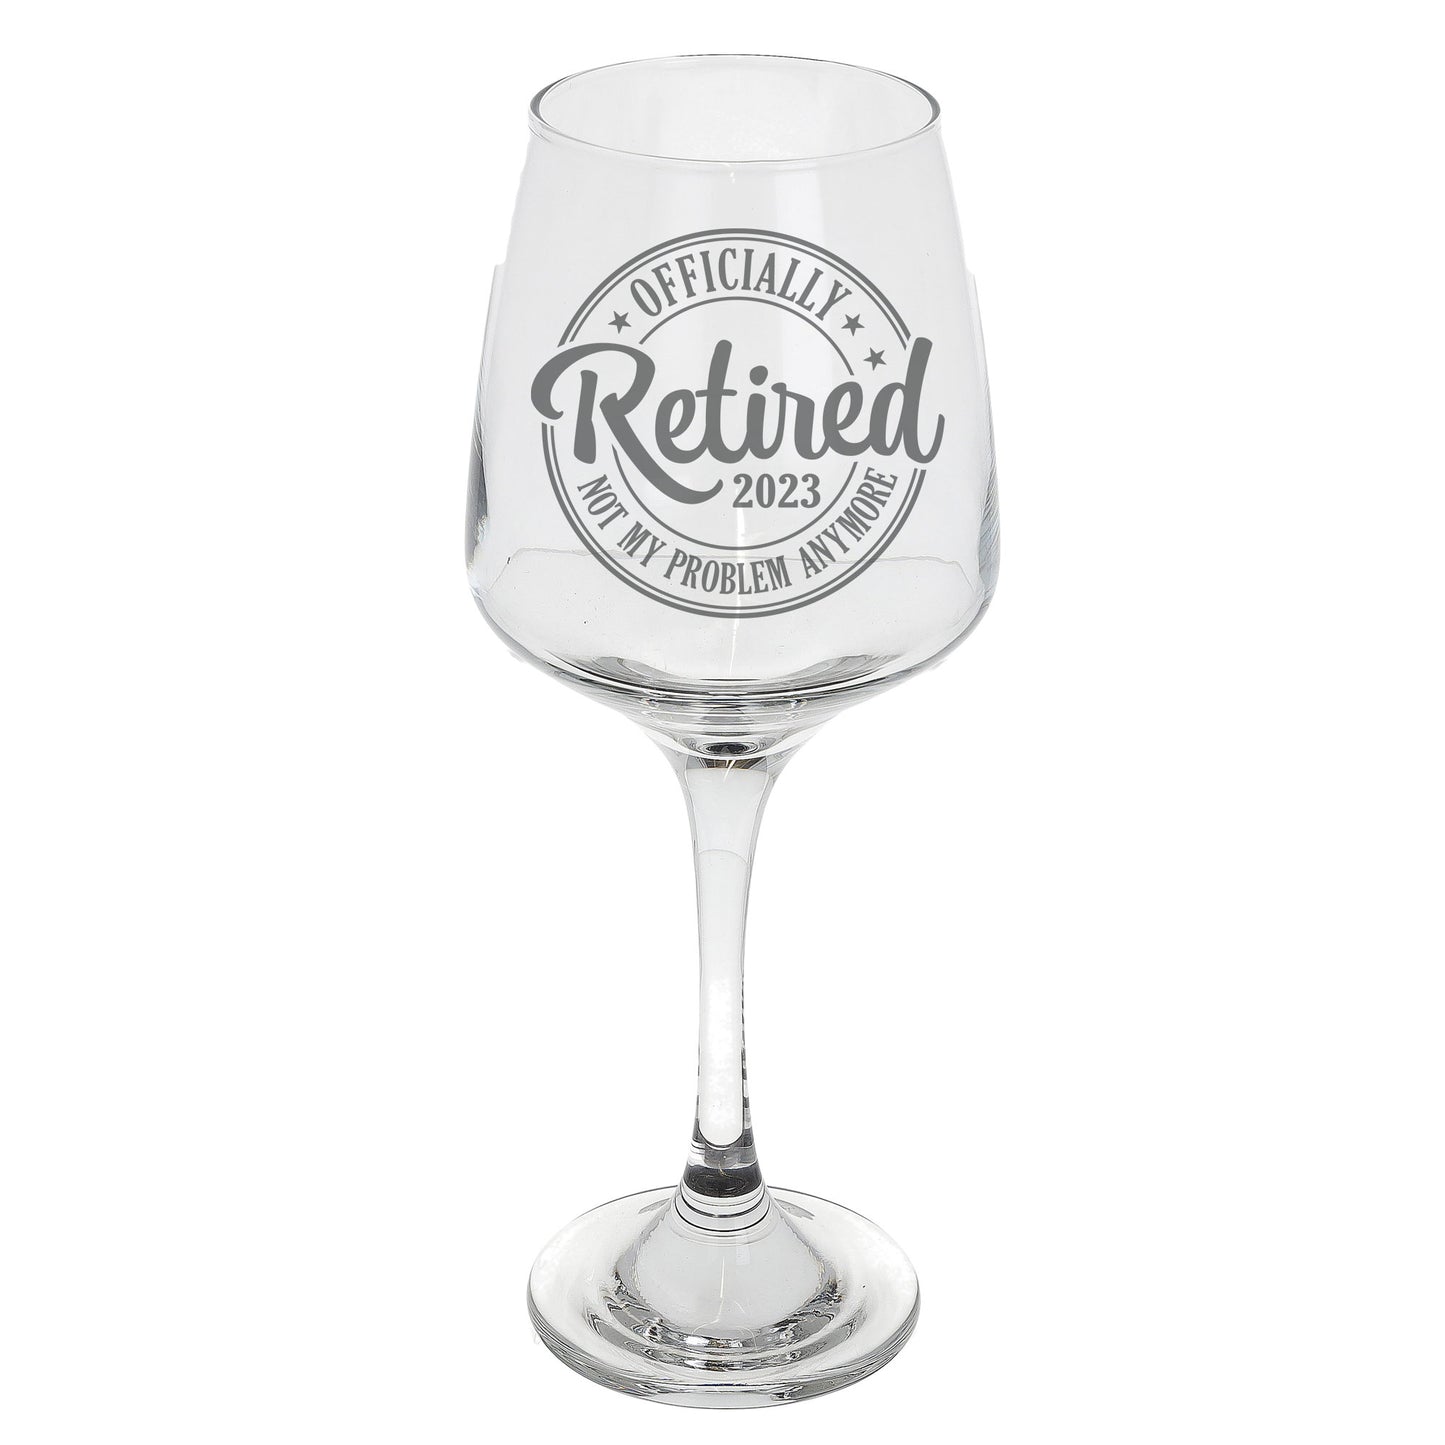 Officially Retired Engraved Wine Glass and/or Coaster Set  - Always Looking Good - Wine Glass Only  